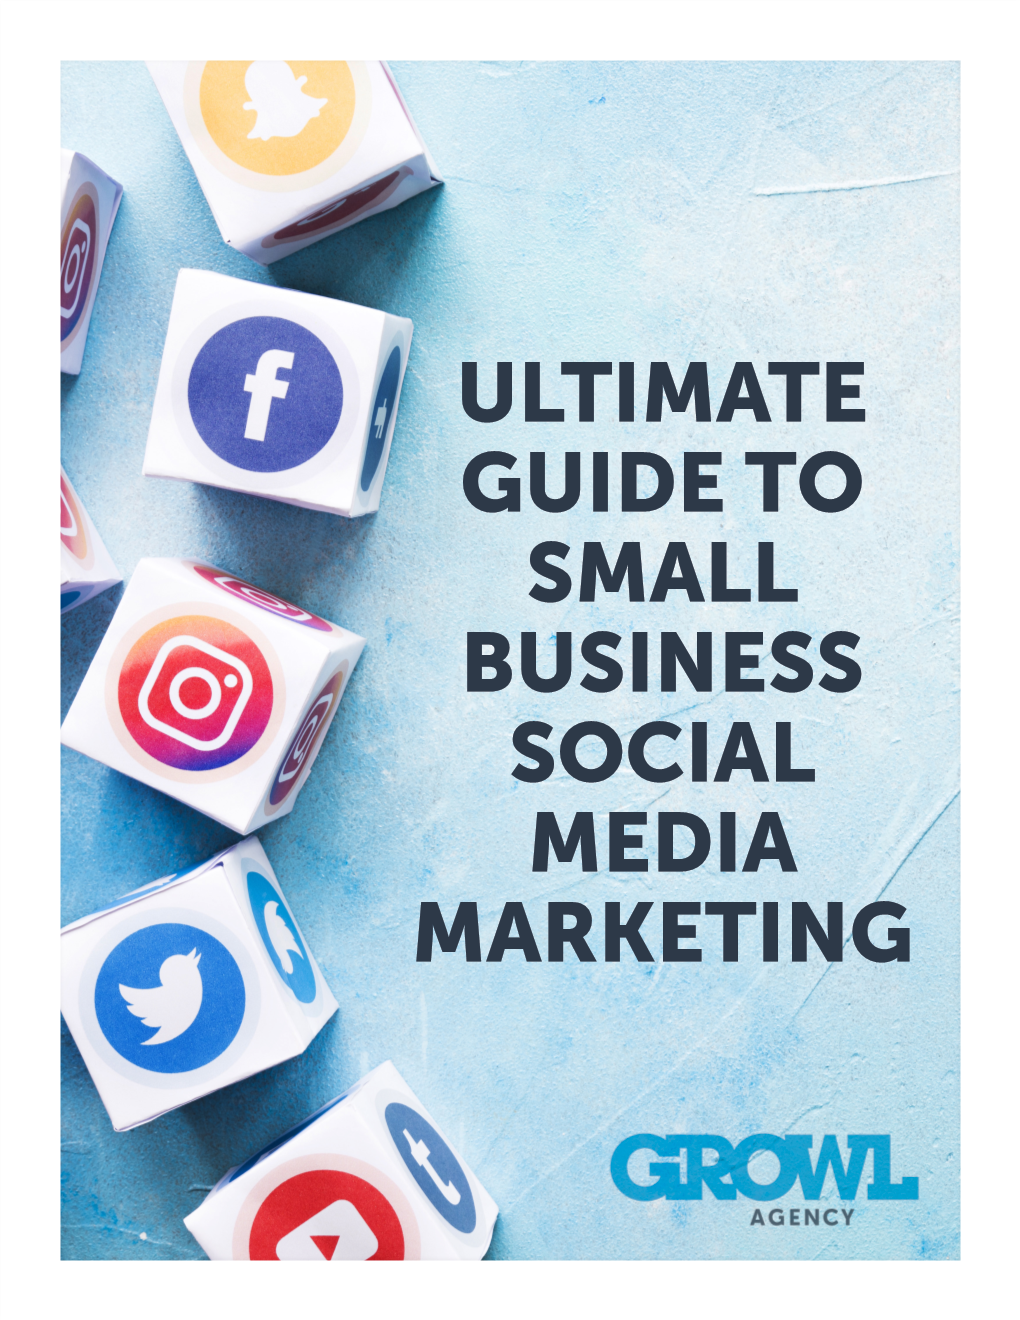 Ultimate Guide to Small Business Social Media Marketing